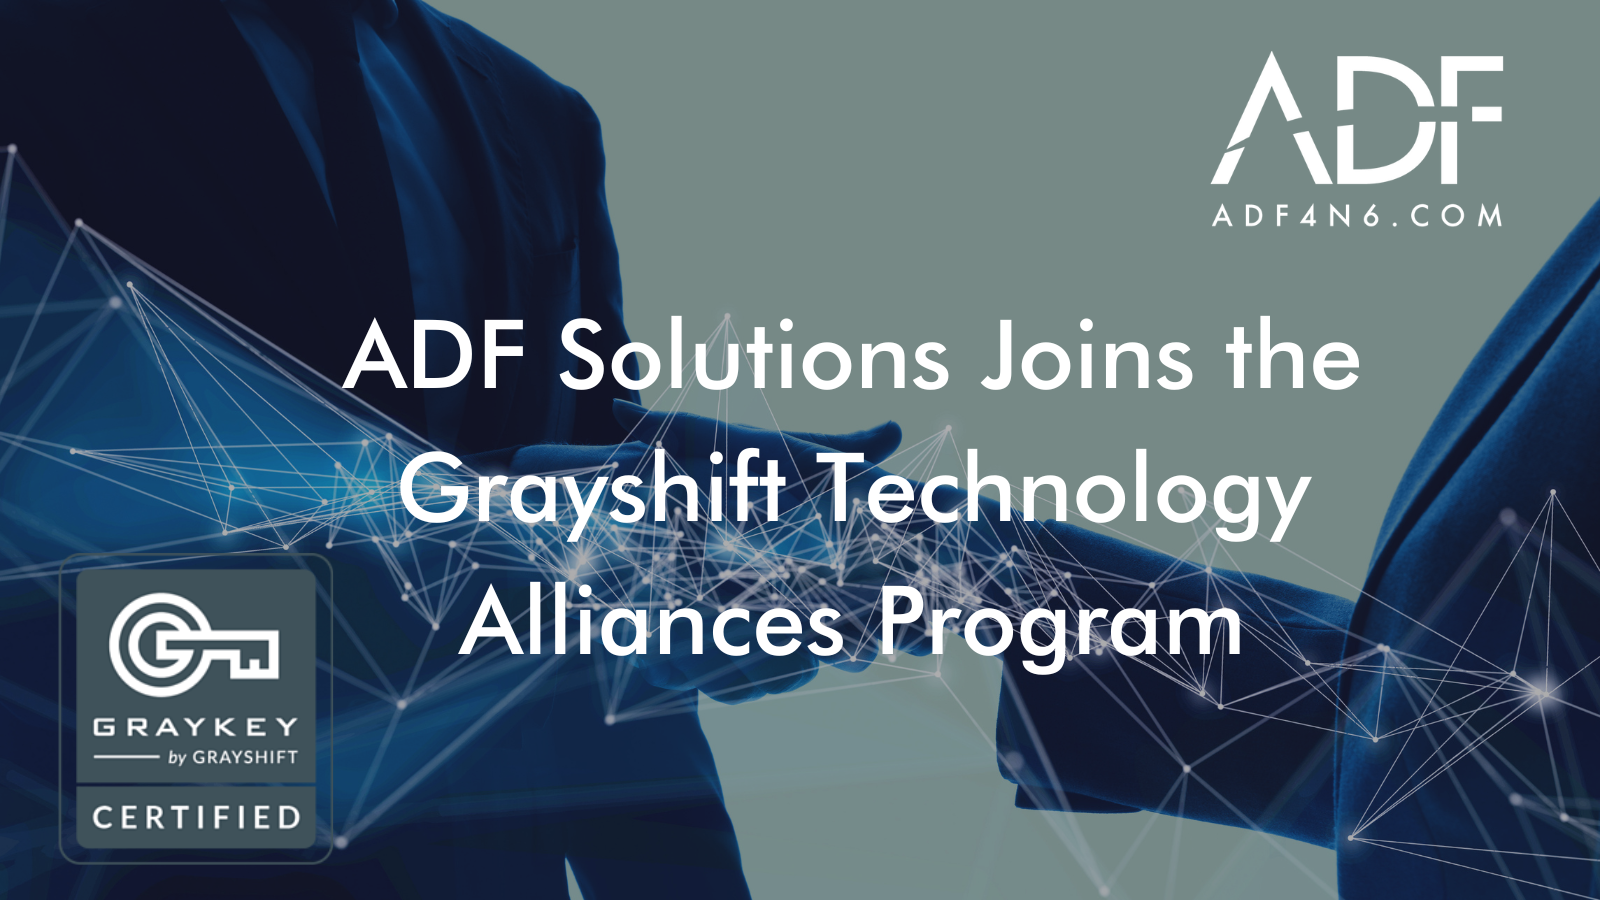 ADF Solutions Joins the Grayshift Technology Alliances Program